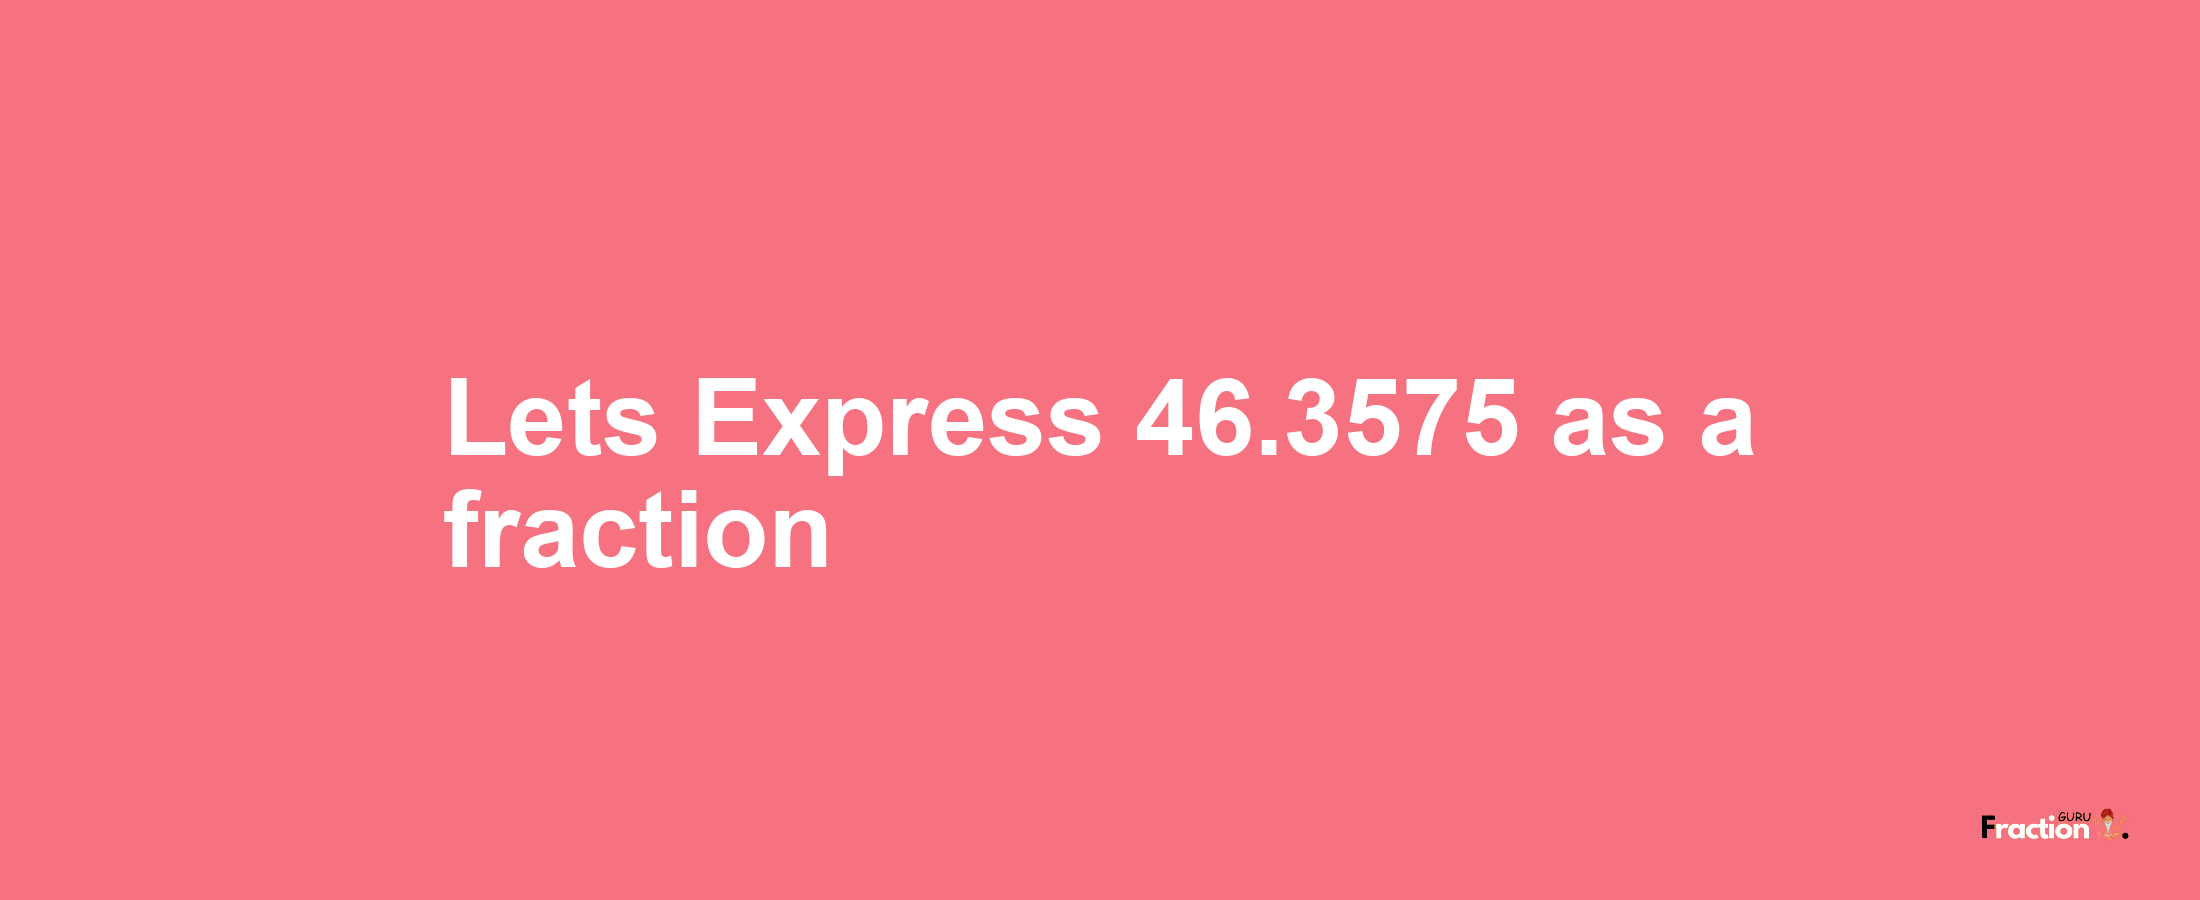 Lets Express 46.3575 as afraction